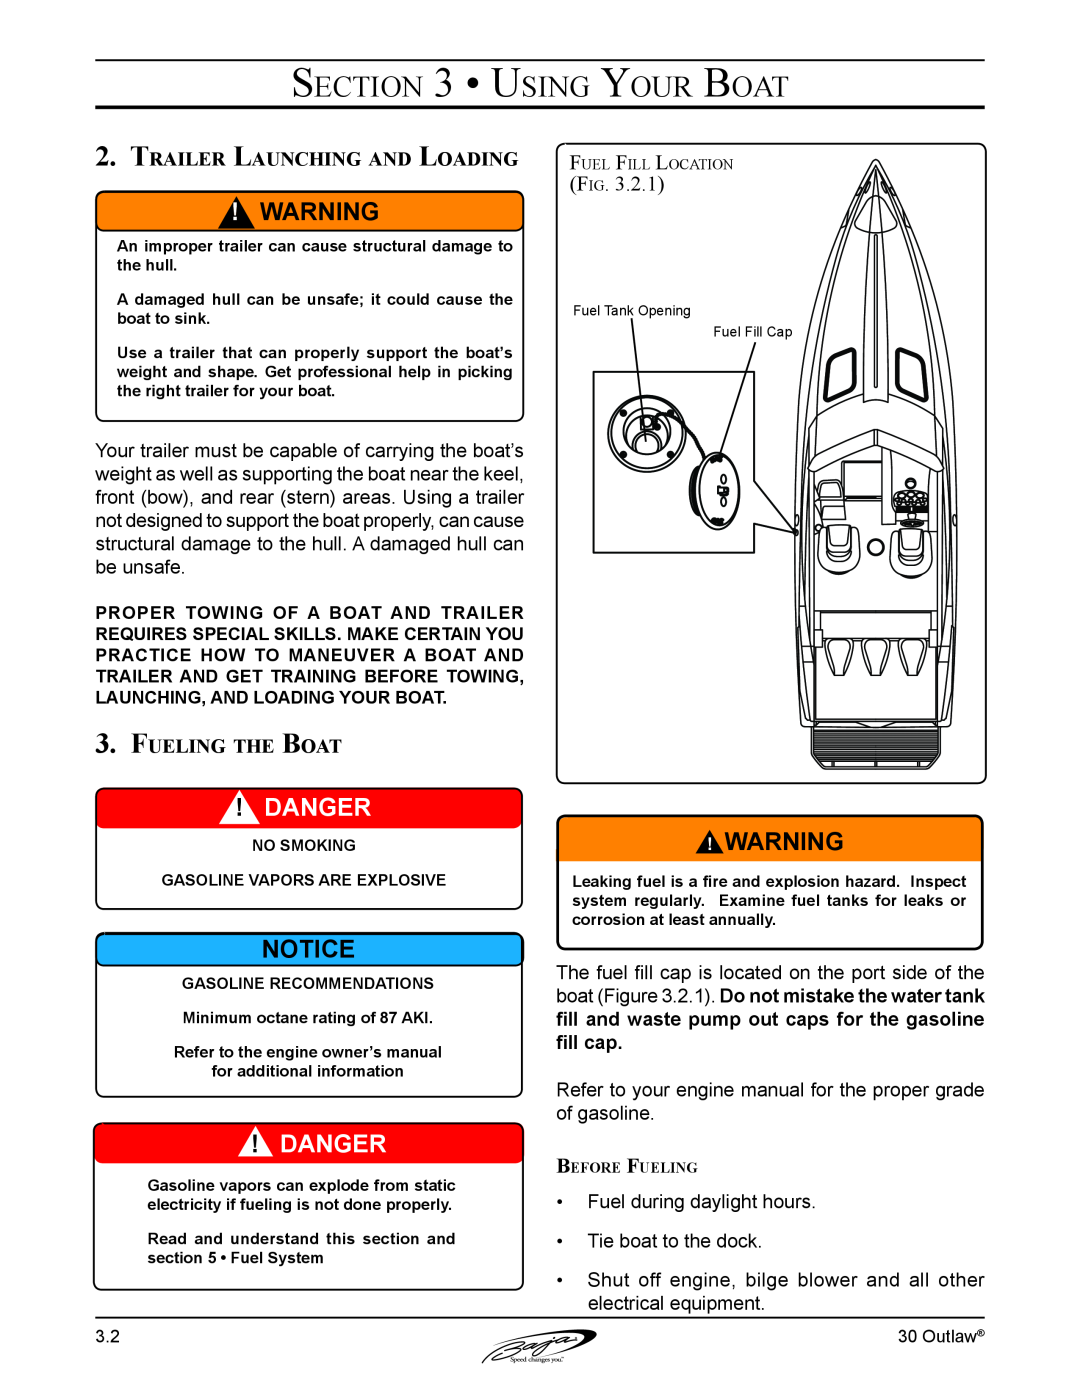 Baja Marine 30 manual Danger, Using Your Boat, Trailer Launching and Loading, Fueling the Boat 